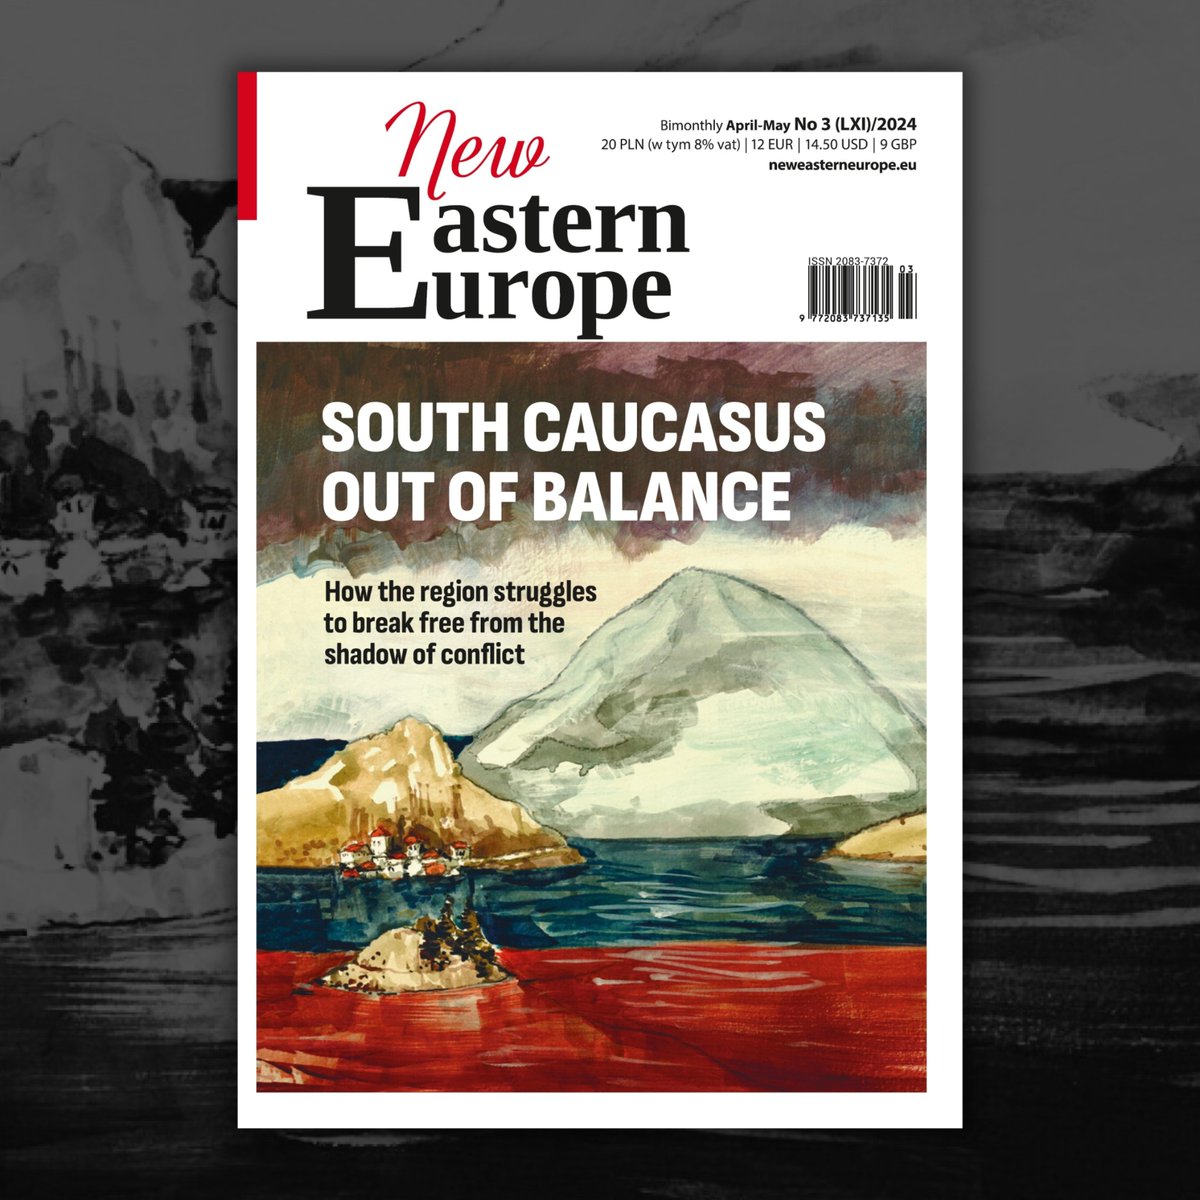 Our latest issue is out! 'South Caucasus Out of Balance' is now available on our website! Throughout history the region of the South Caucasus, which is made up of the countries of Armenia, Azerbaijan and Georgia, has found itself at the crossroads of geopolitics. This…